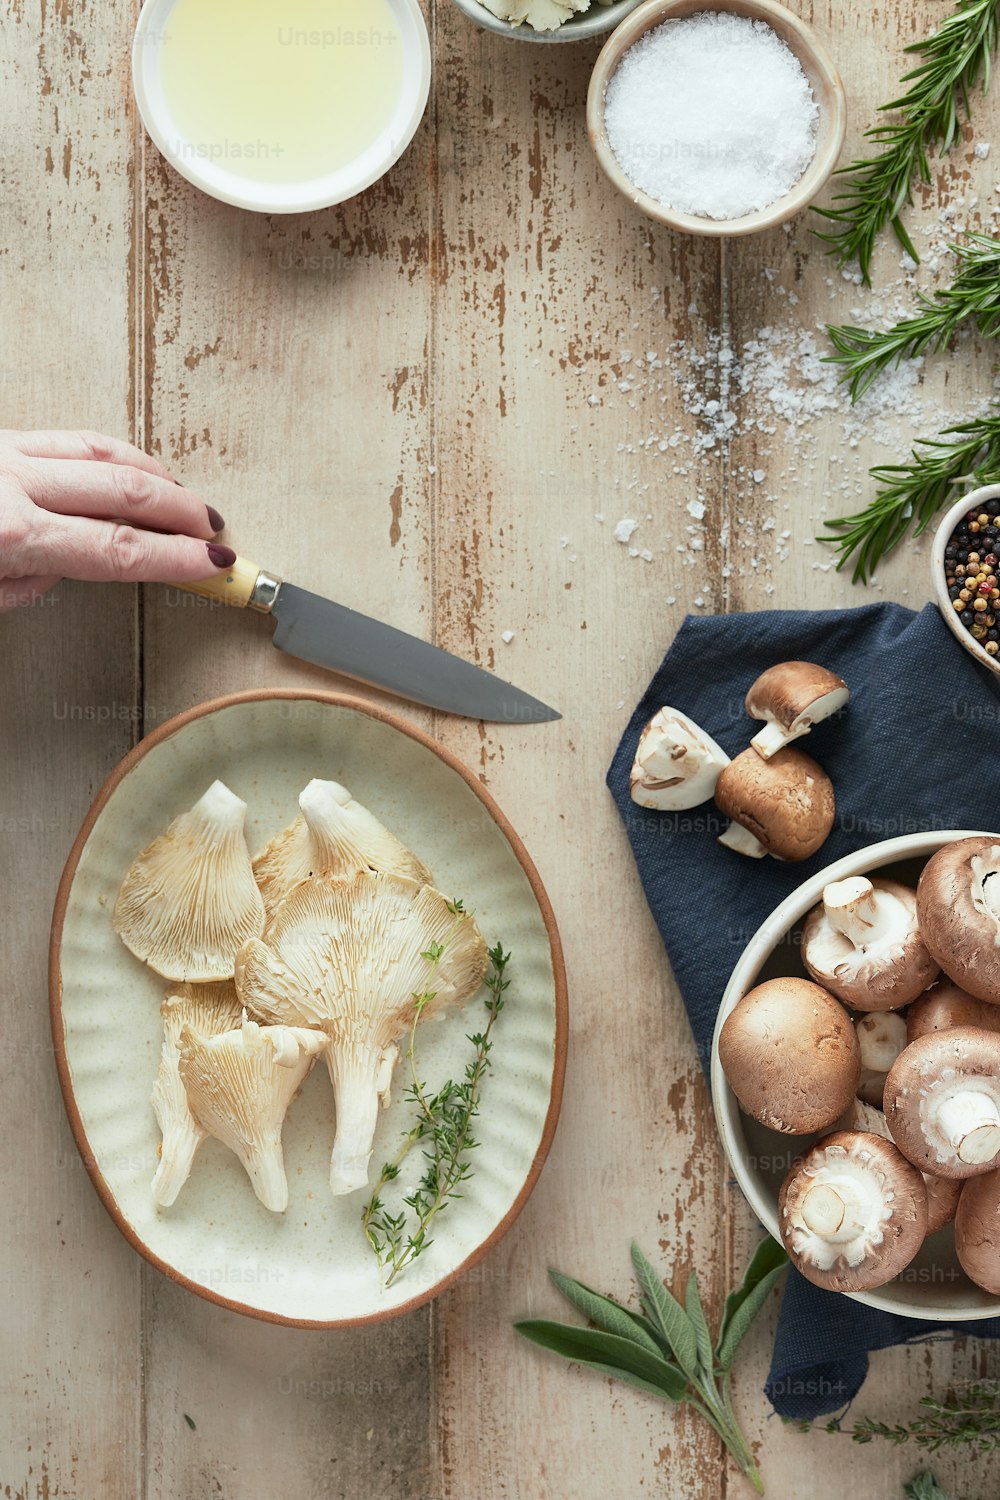 a person cutting mushrooms on a plate with a knife